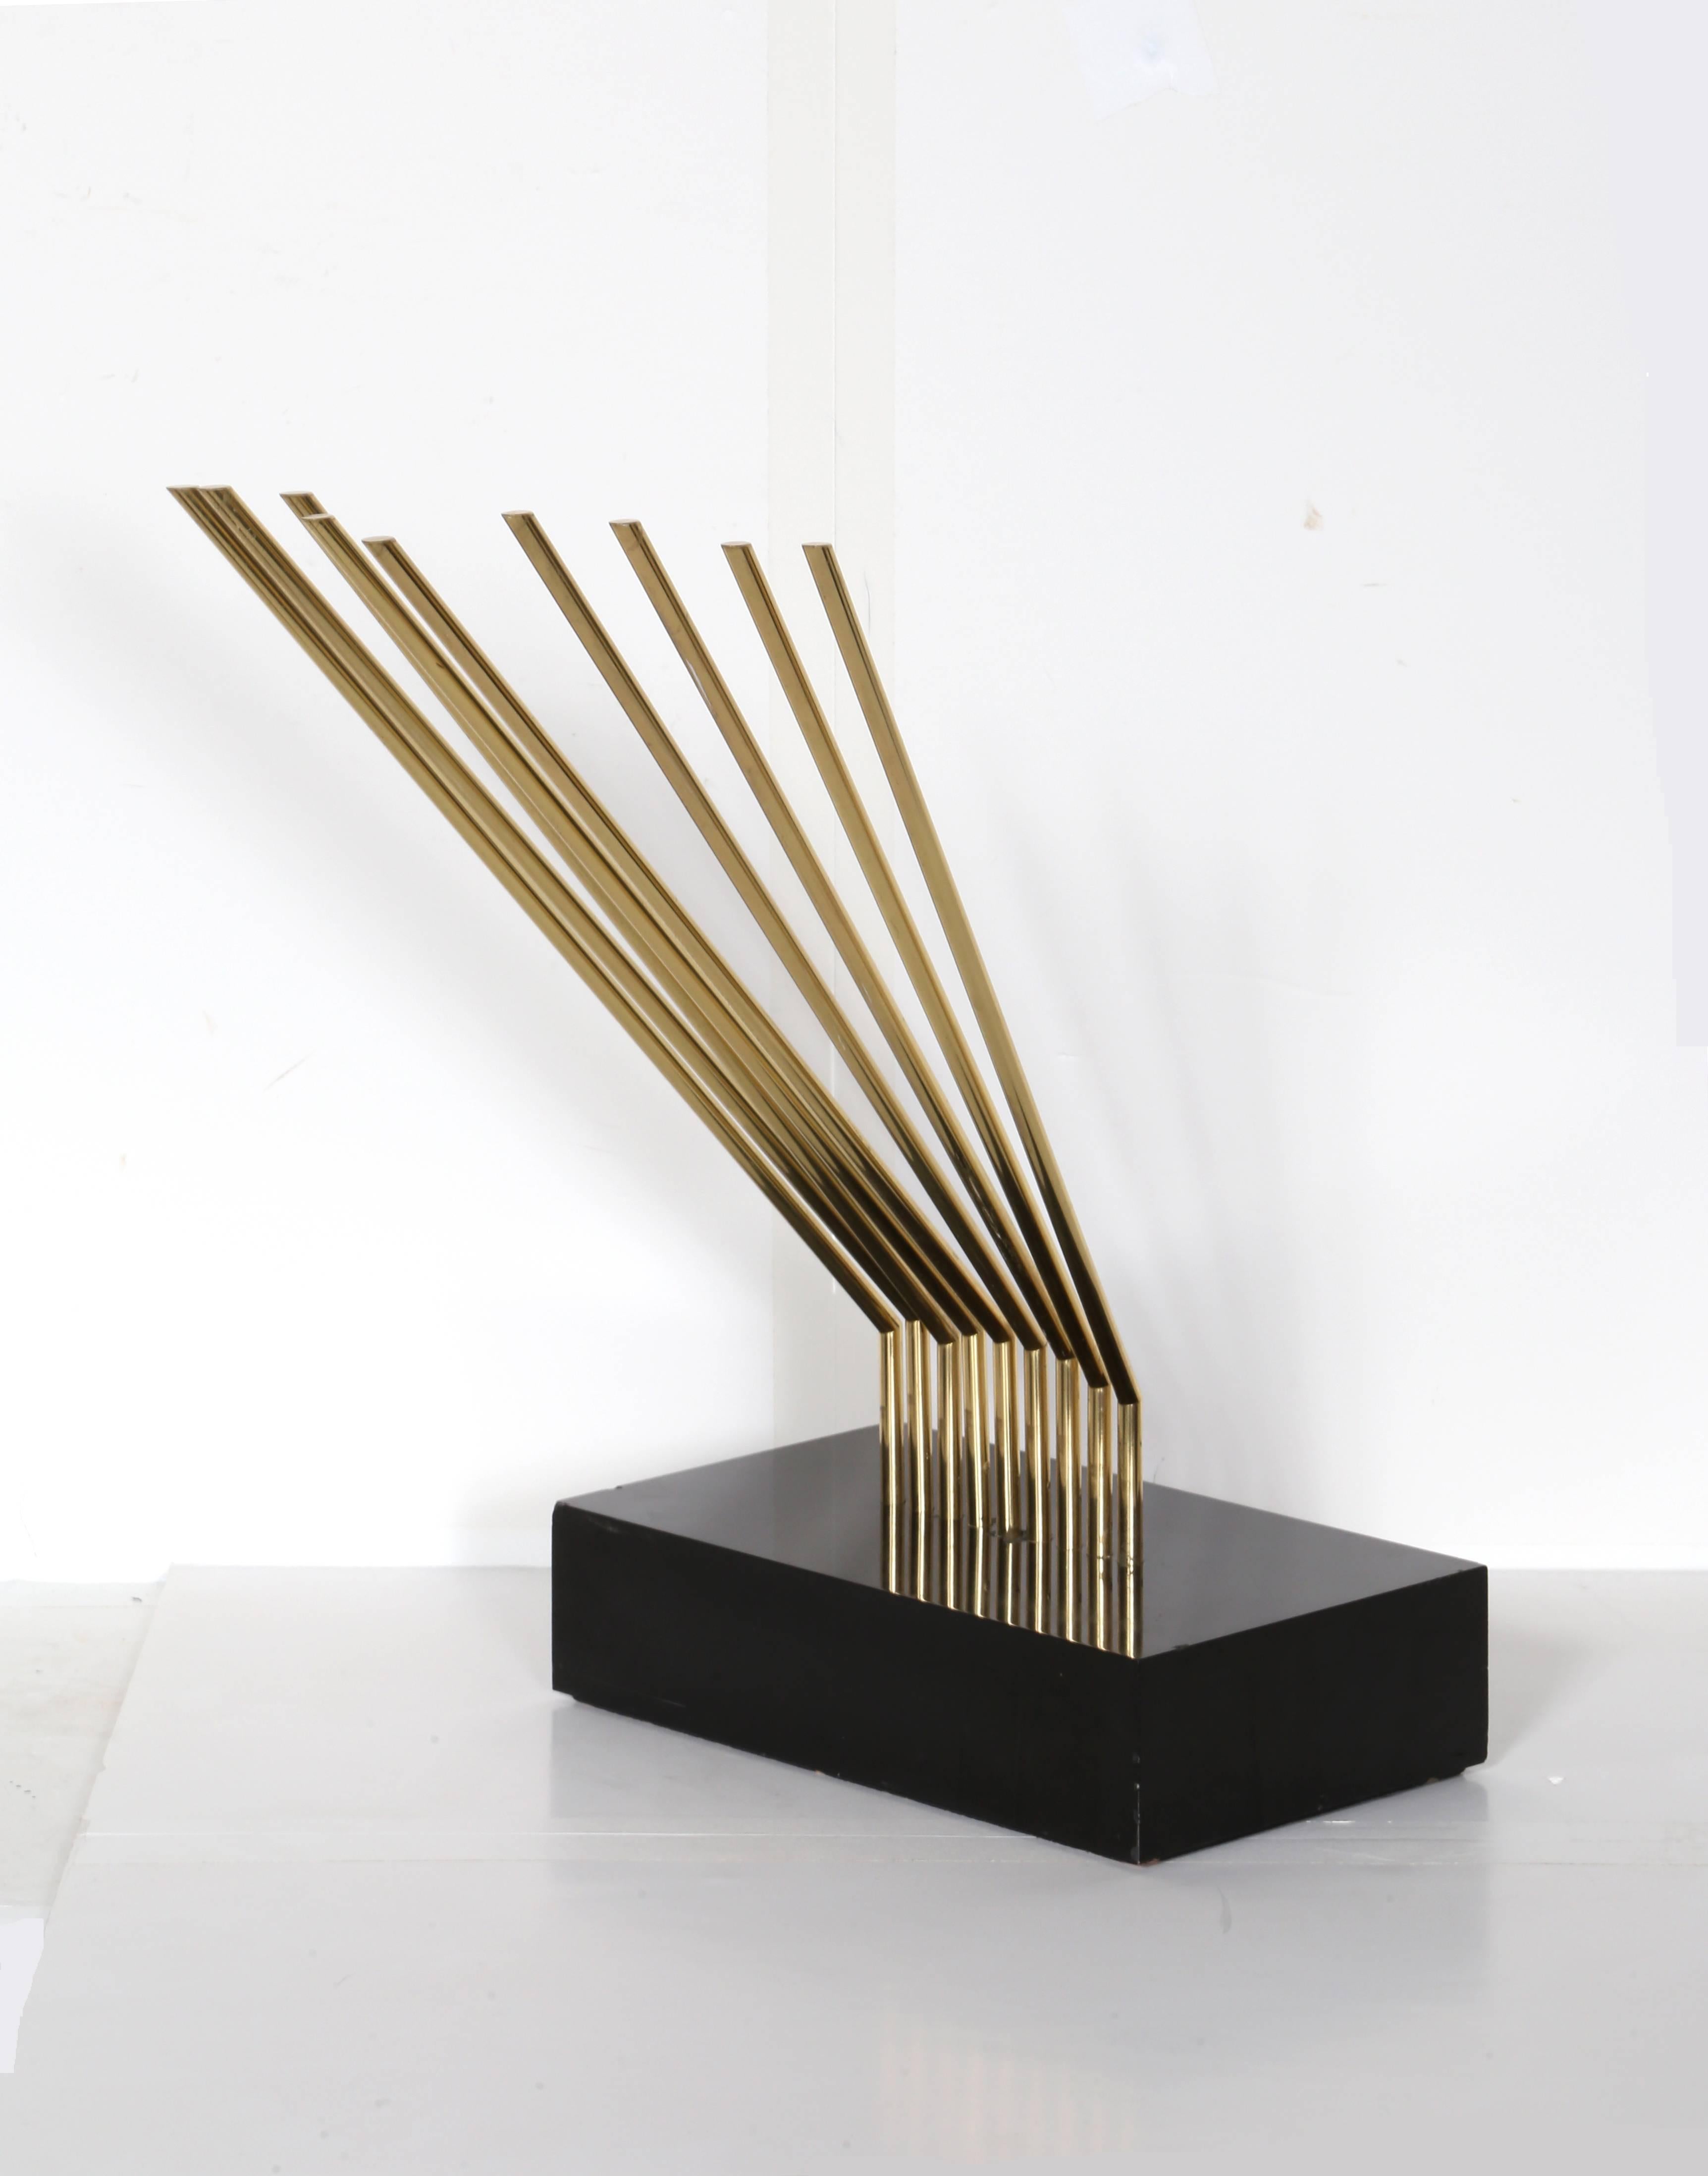 Artist: Yaacov Agam, Israeli (1928 - )
Title: In all Directions (Toutes Directions)
Year: circa 1970 
Medium: Brass Sculpture, signed, titled, and numbered in marker on base bottom
Edition: 6/9
Size: 17.25  x 11.5  x 7.25 in. (43.82  x 29.21  x